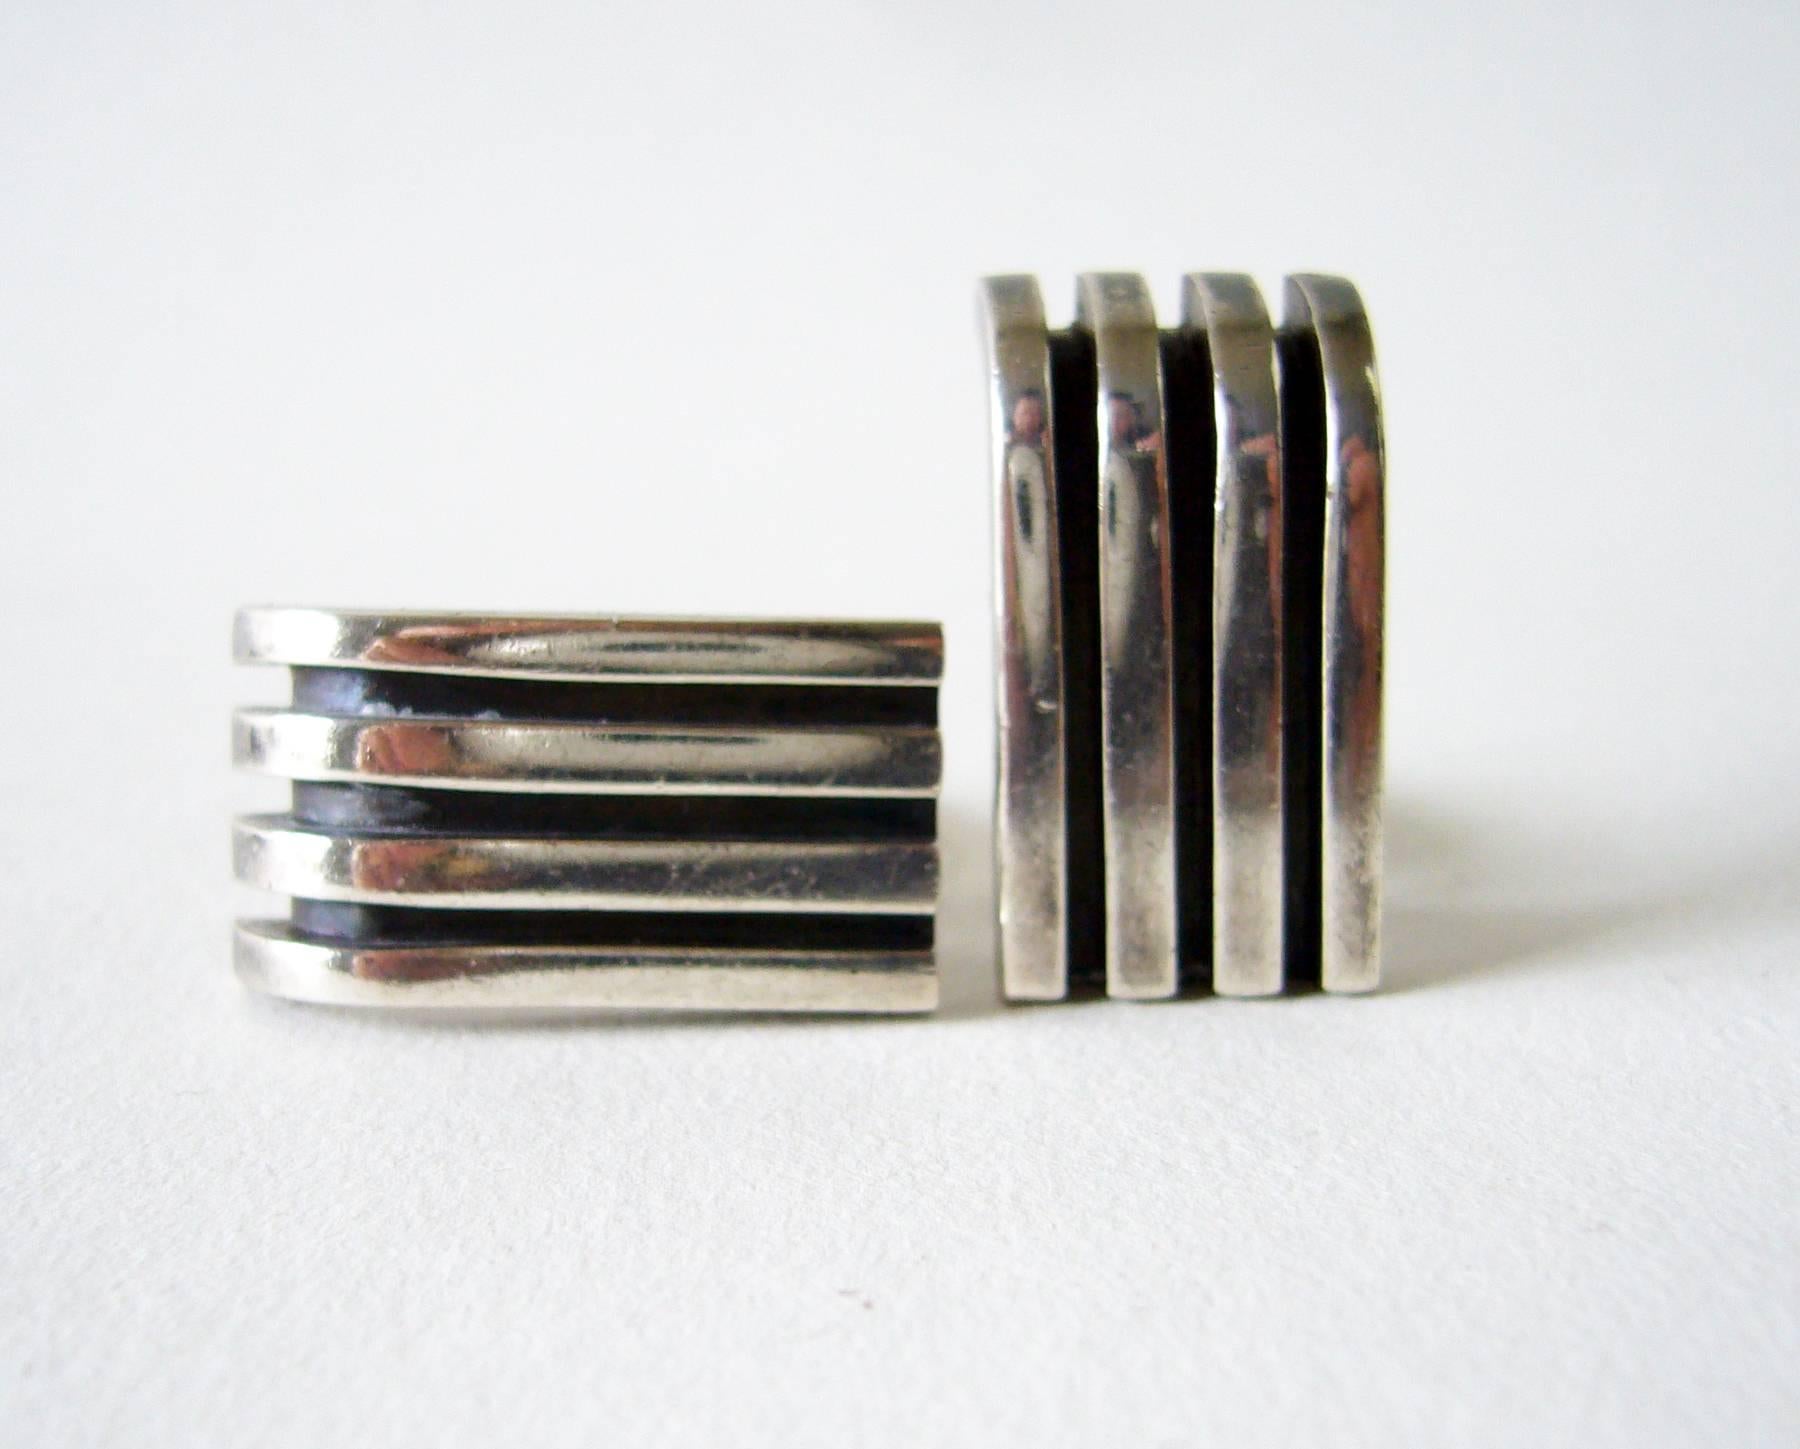 Machine age sterling silver cufflinks and tie bar set designed and created by Antonio Pineda of Mexico.  Cufflinks measure 1 1/8